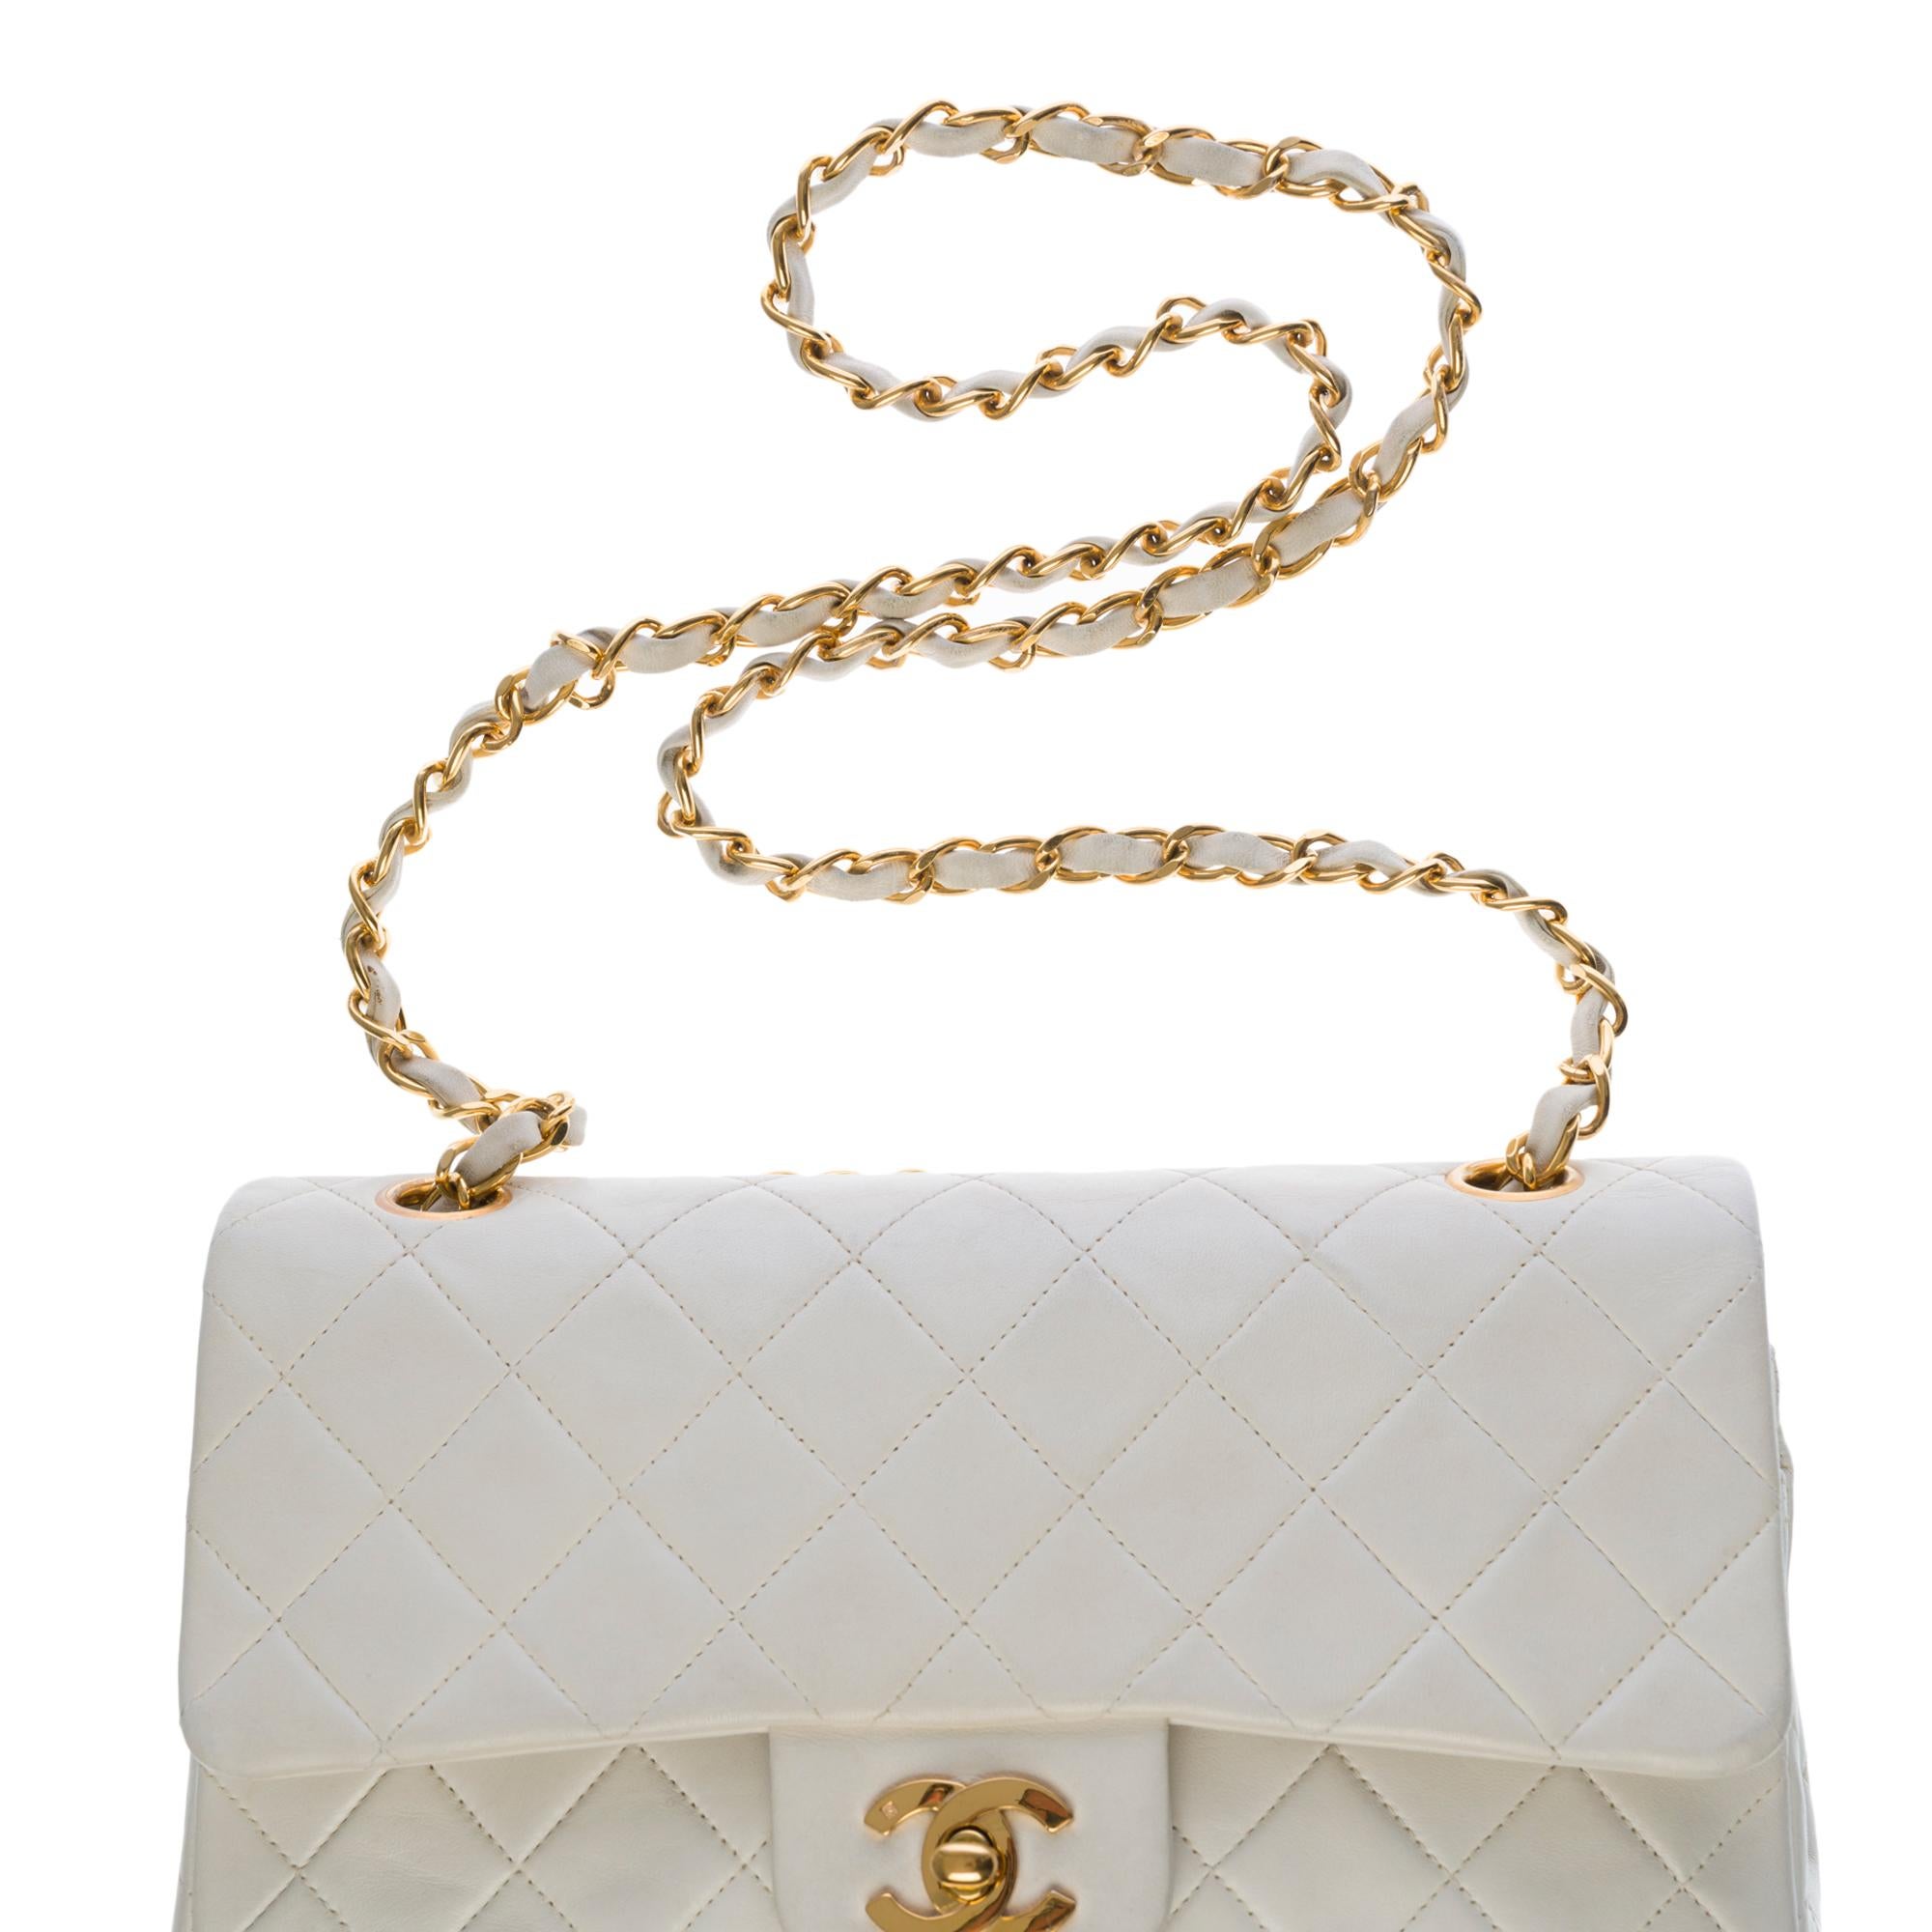 Women's The Coveted Chanel Timeless 23cm Shoulder bag in white quilted lambskin, GHW